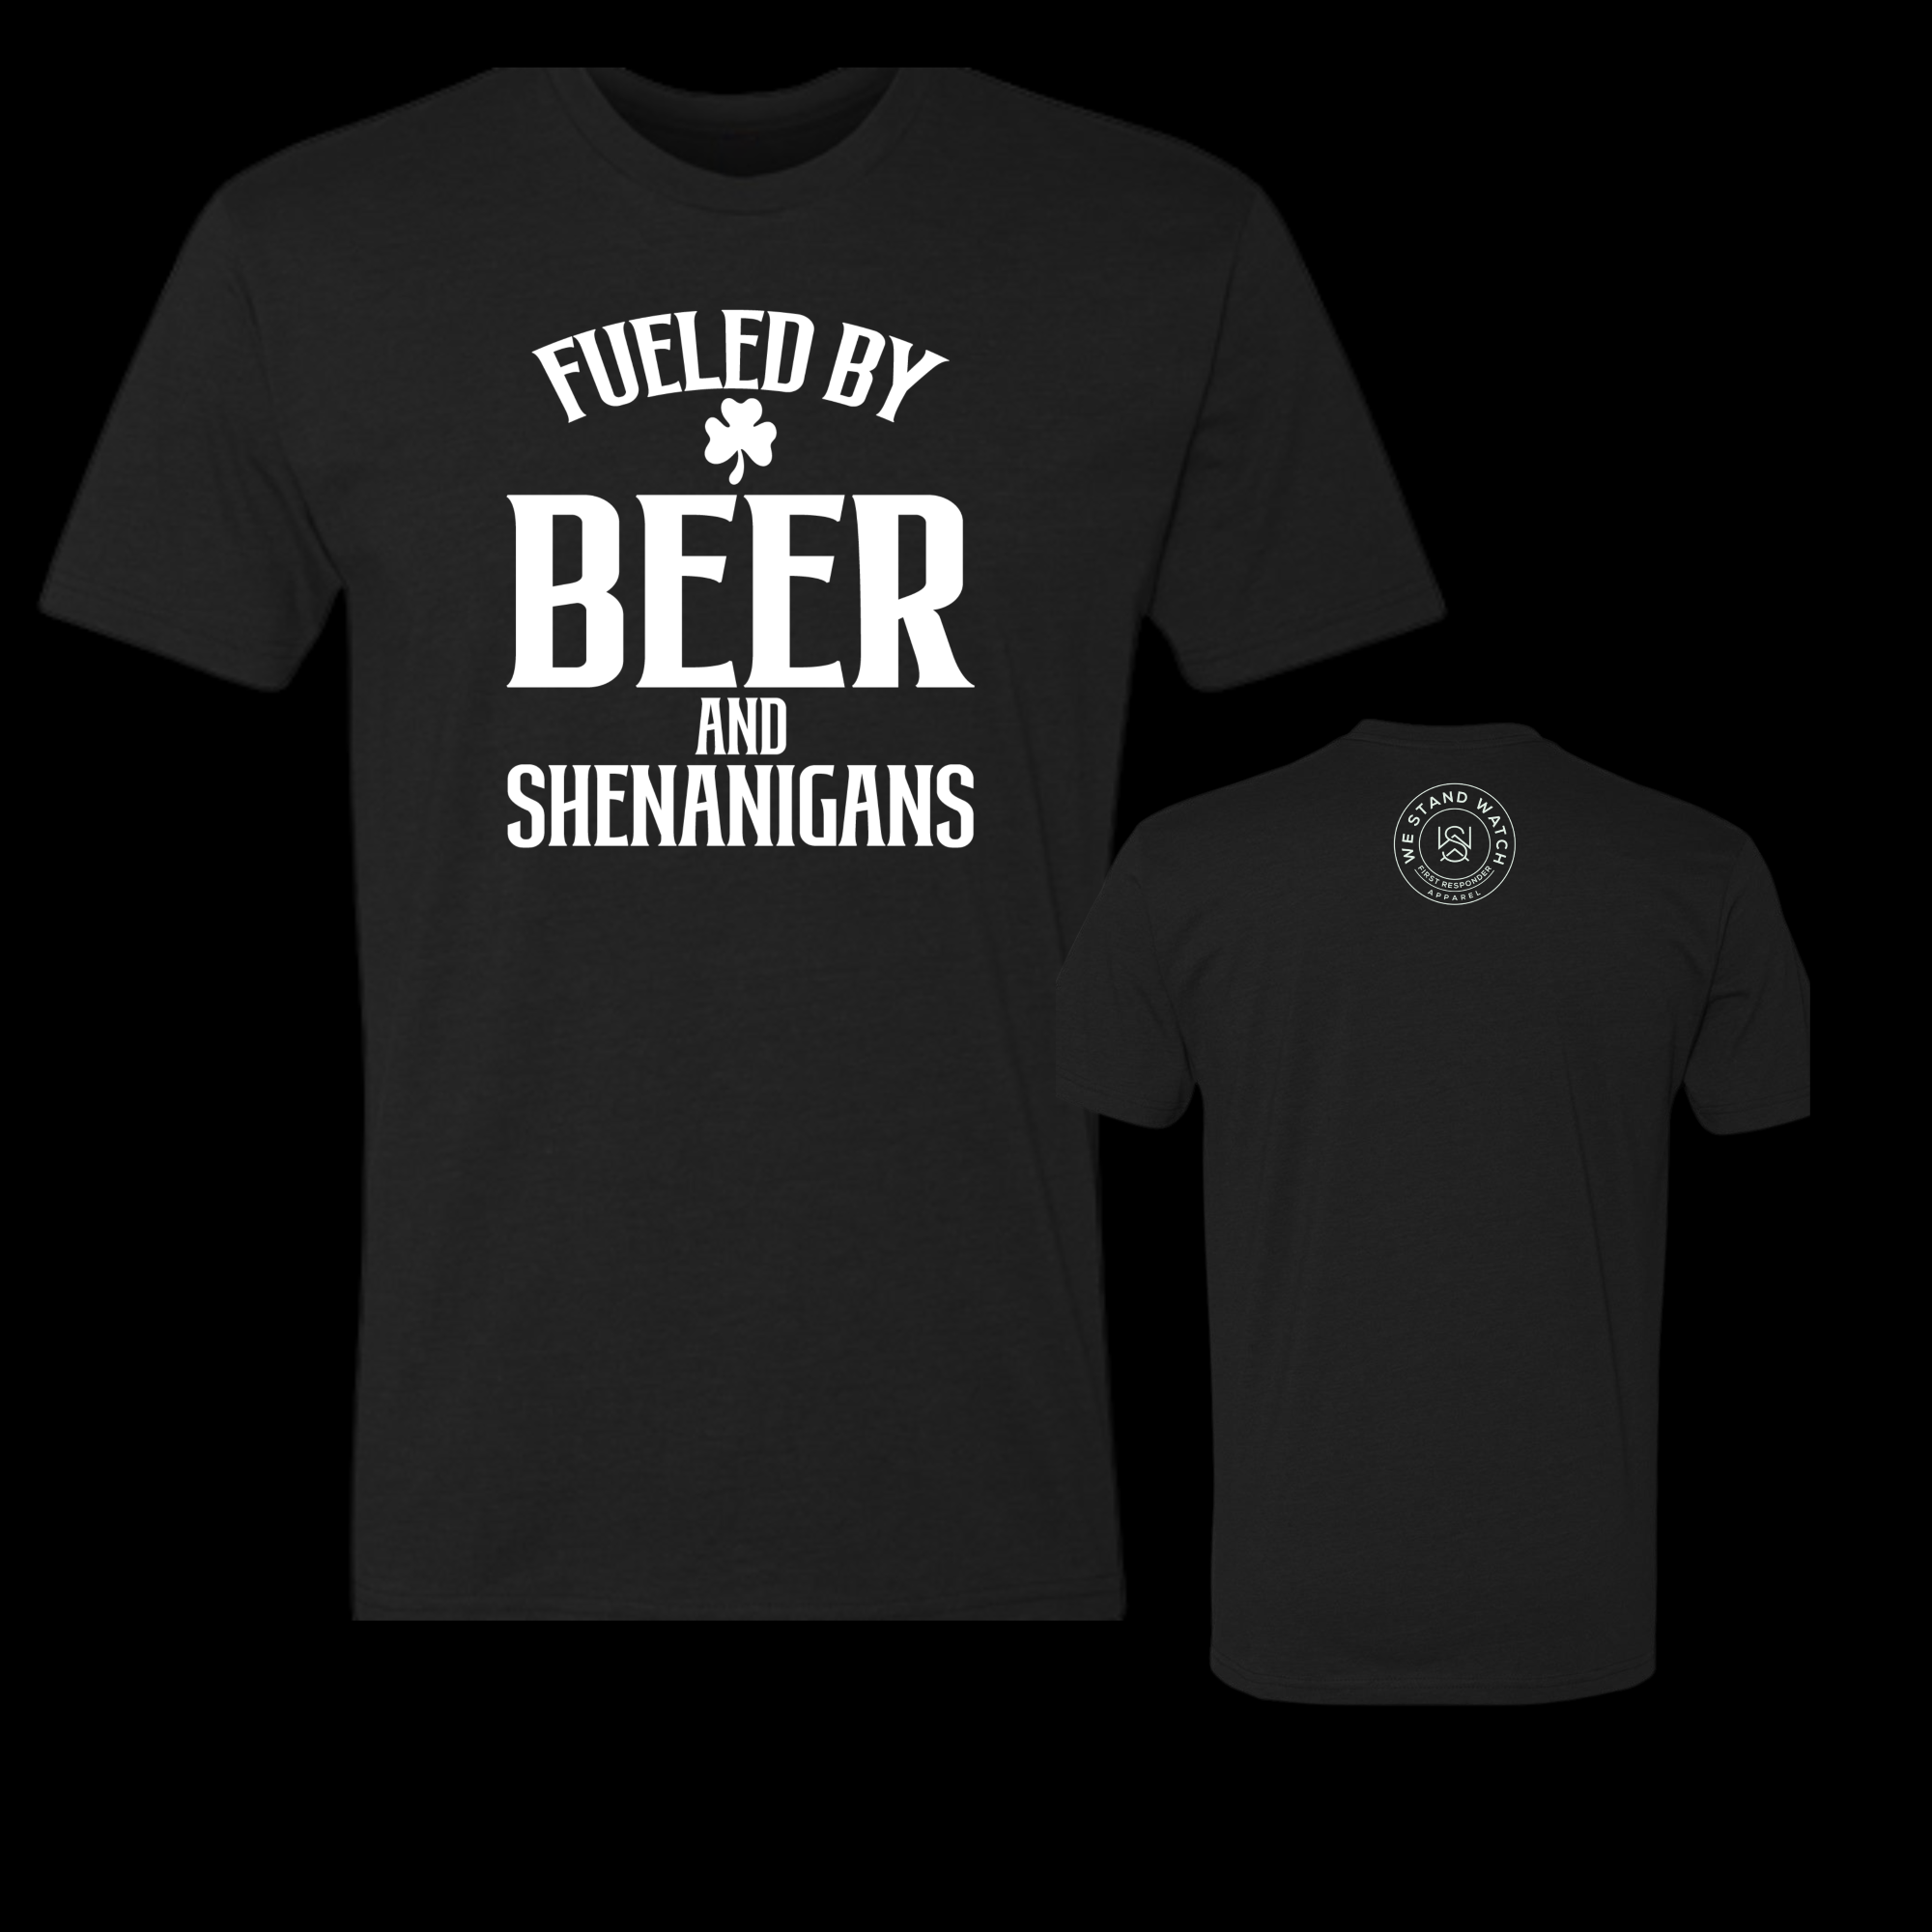 Fueled by Beer Shennigans - We Stand Watch